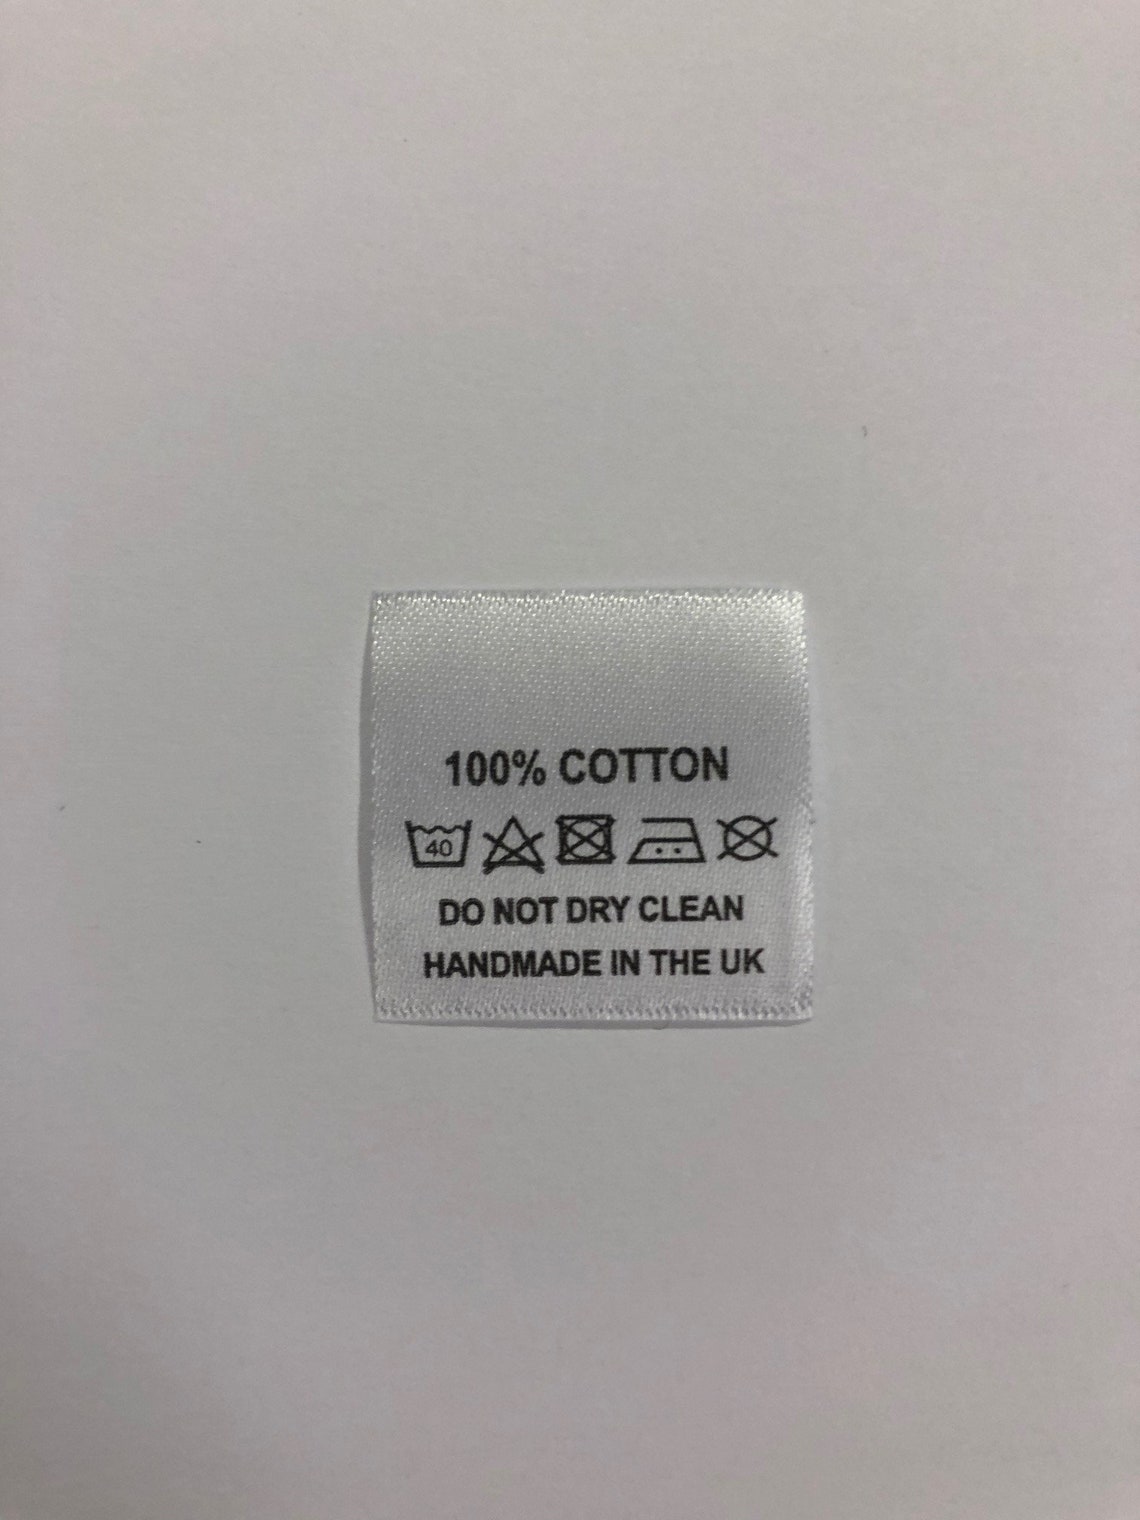 100% cotton Wash care labels clothing labels 7 variations | Etsy